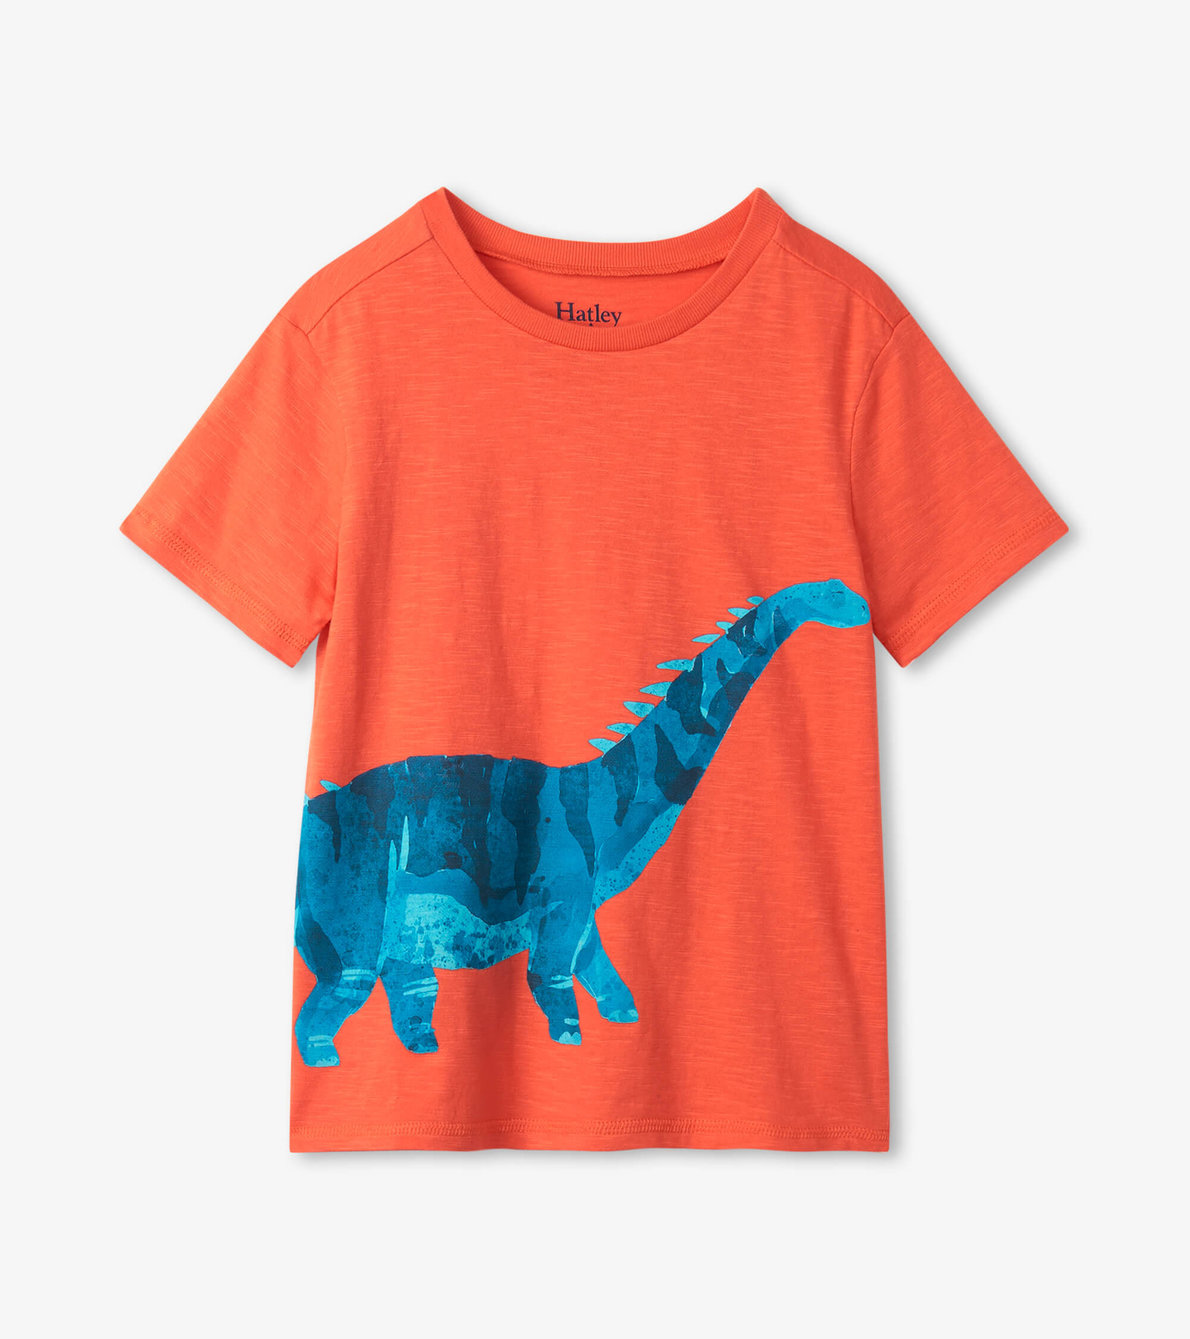 View larger image of Prehistoric Dino Graphic tee